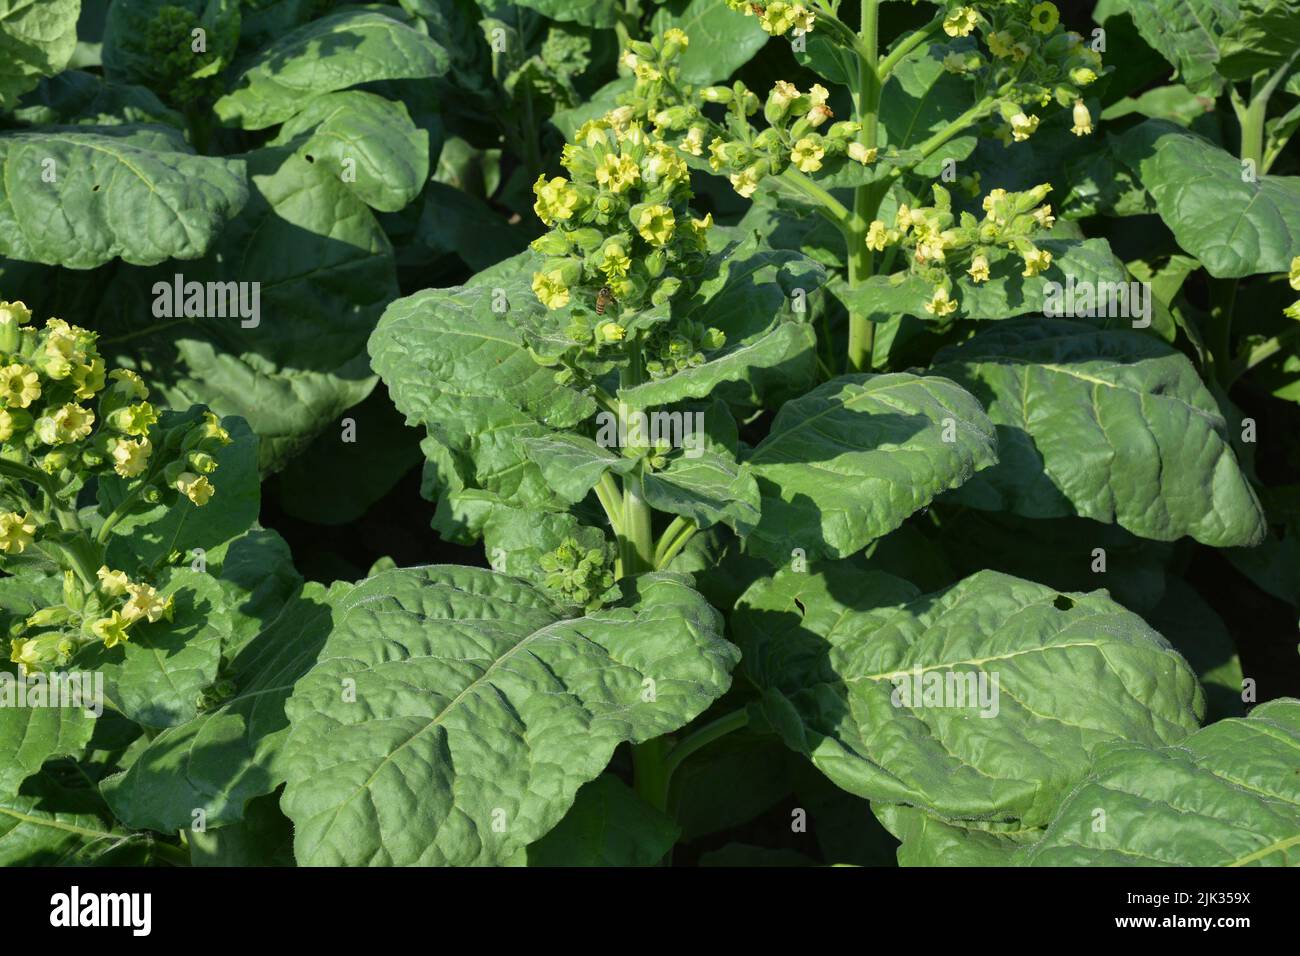 Growing tobacco. A close-up on a tobacco plant, Nicotiana rustica, Aztec tobacco or strong tobacco blooming with yellow tiny flowers. Stock Photo